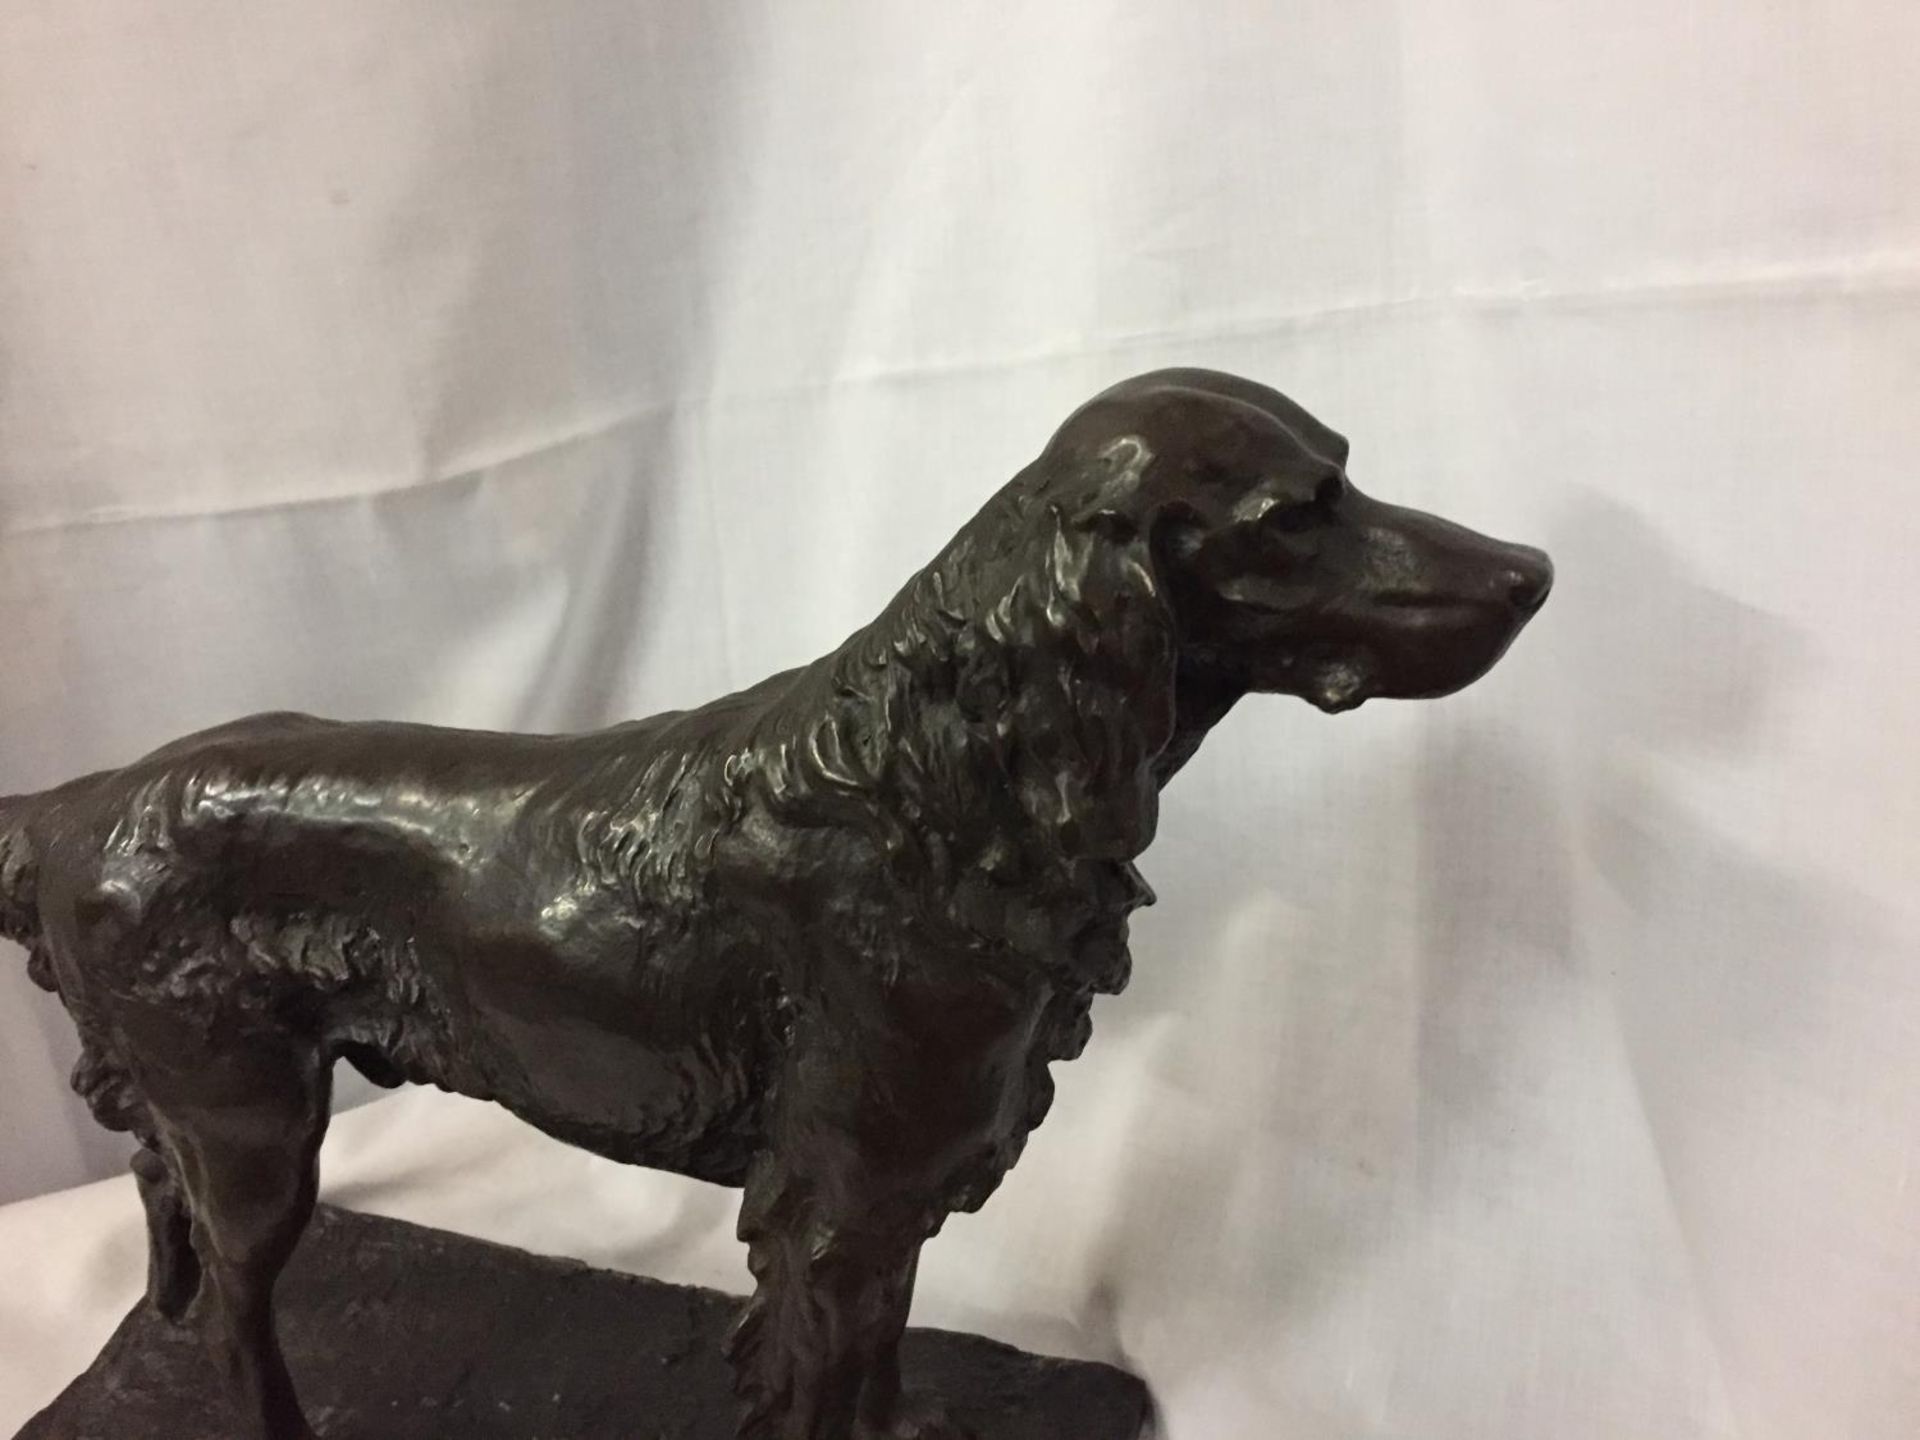 A BRONZE STYLE SCULPTURE OF A RETREIVER DOG. LENGTH 51CM, HEIGHT 35CM - Image 2 of 6